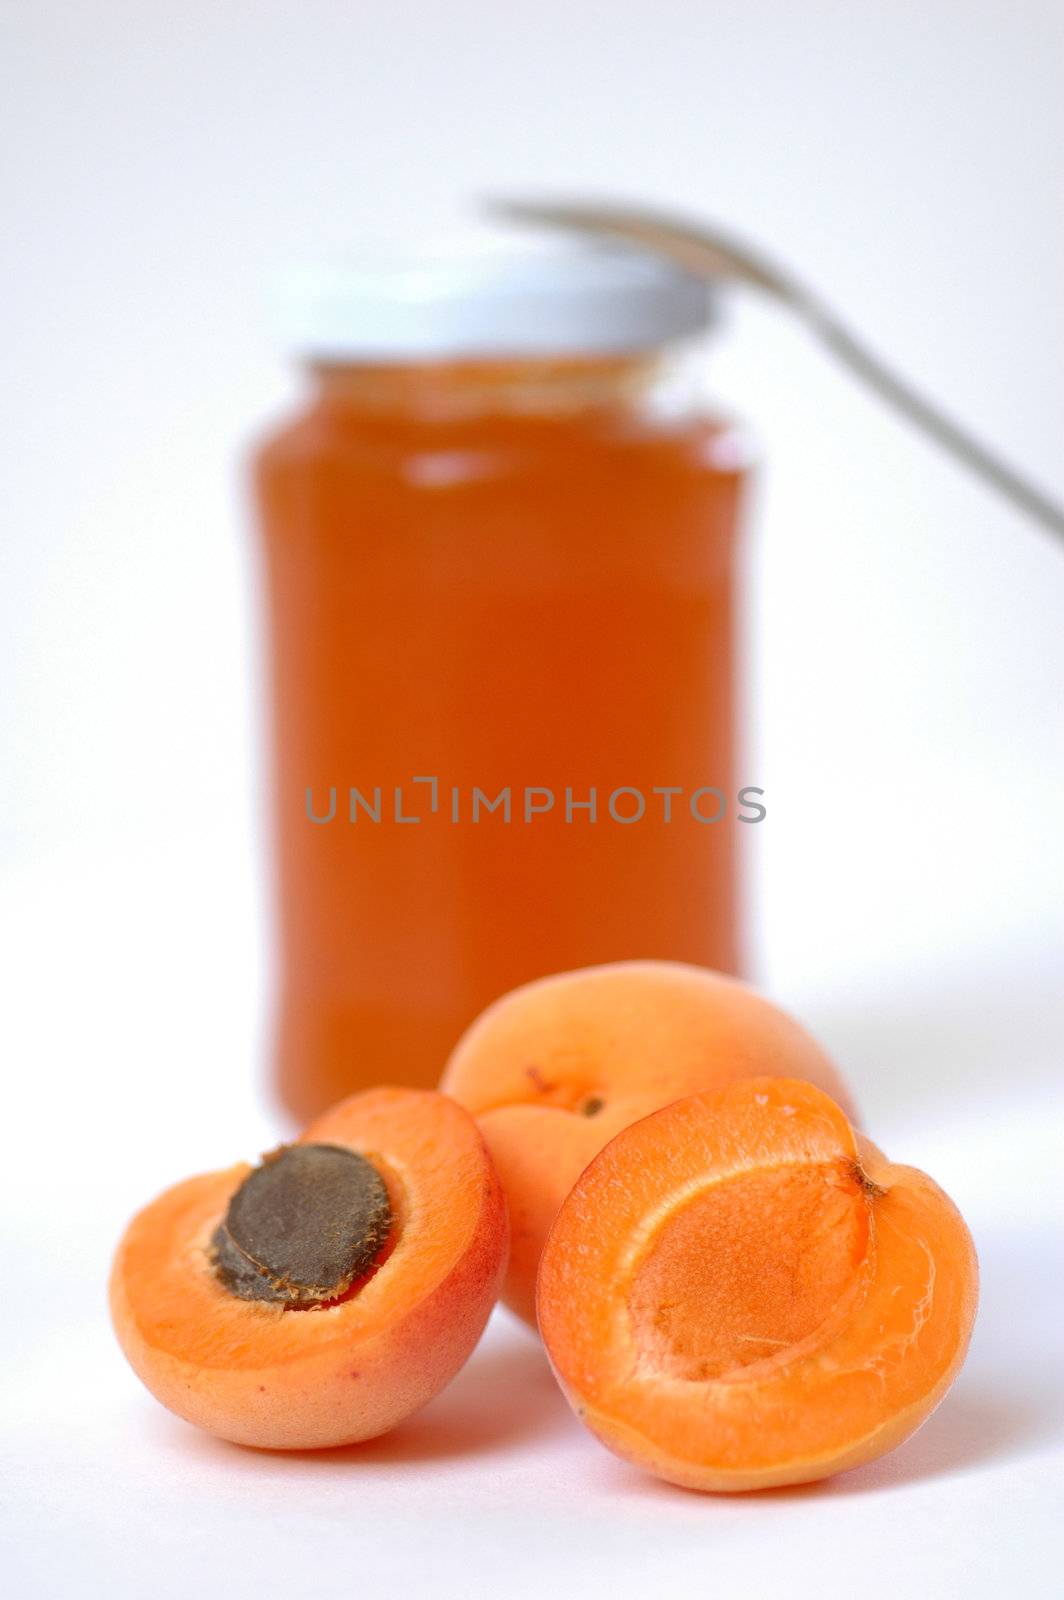 Apricot Jam by Bestpictures